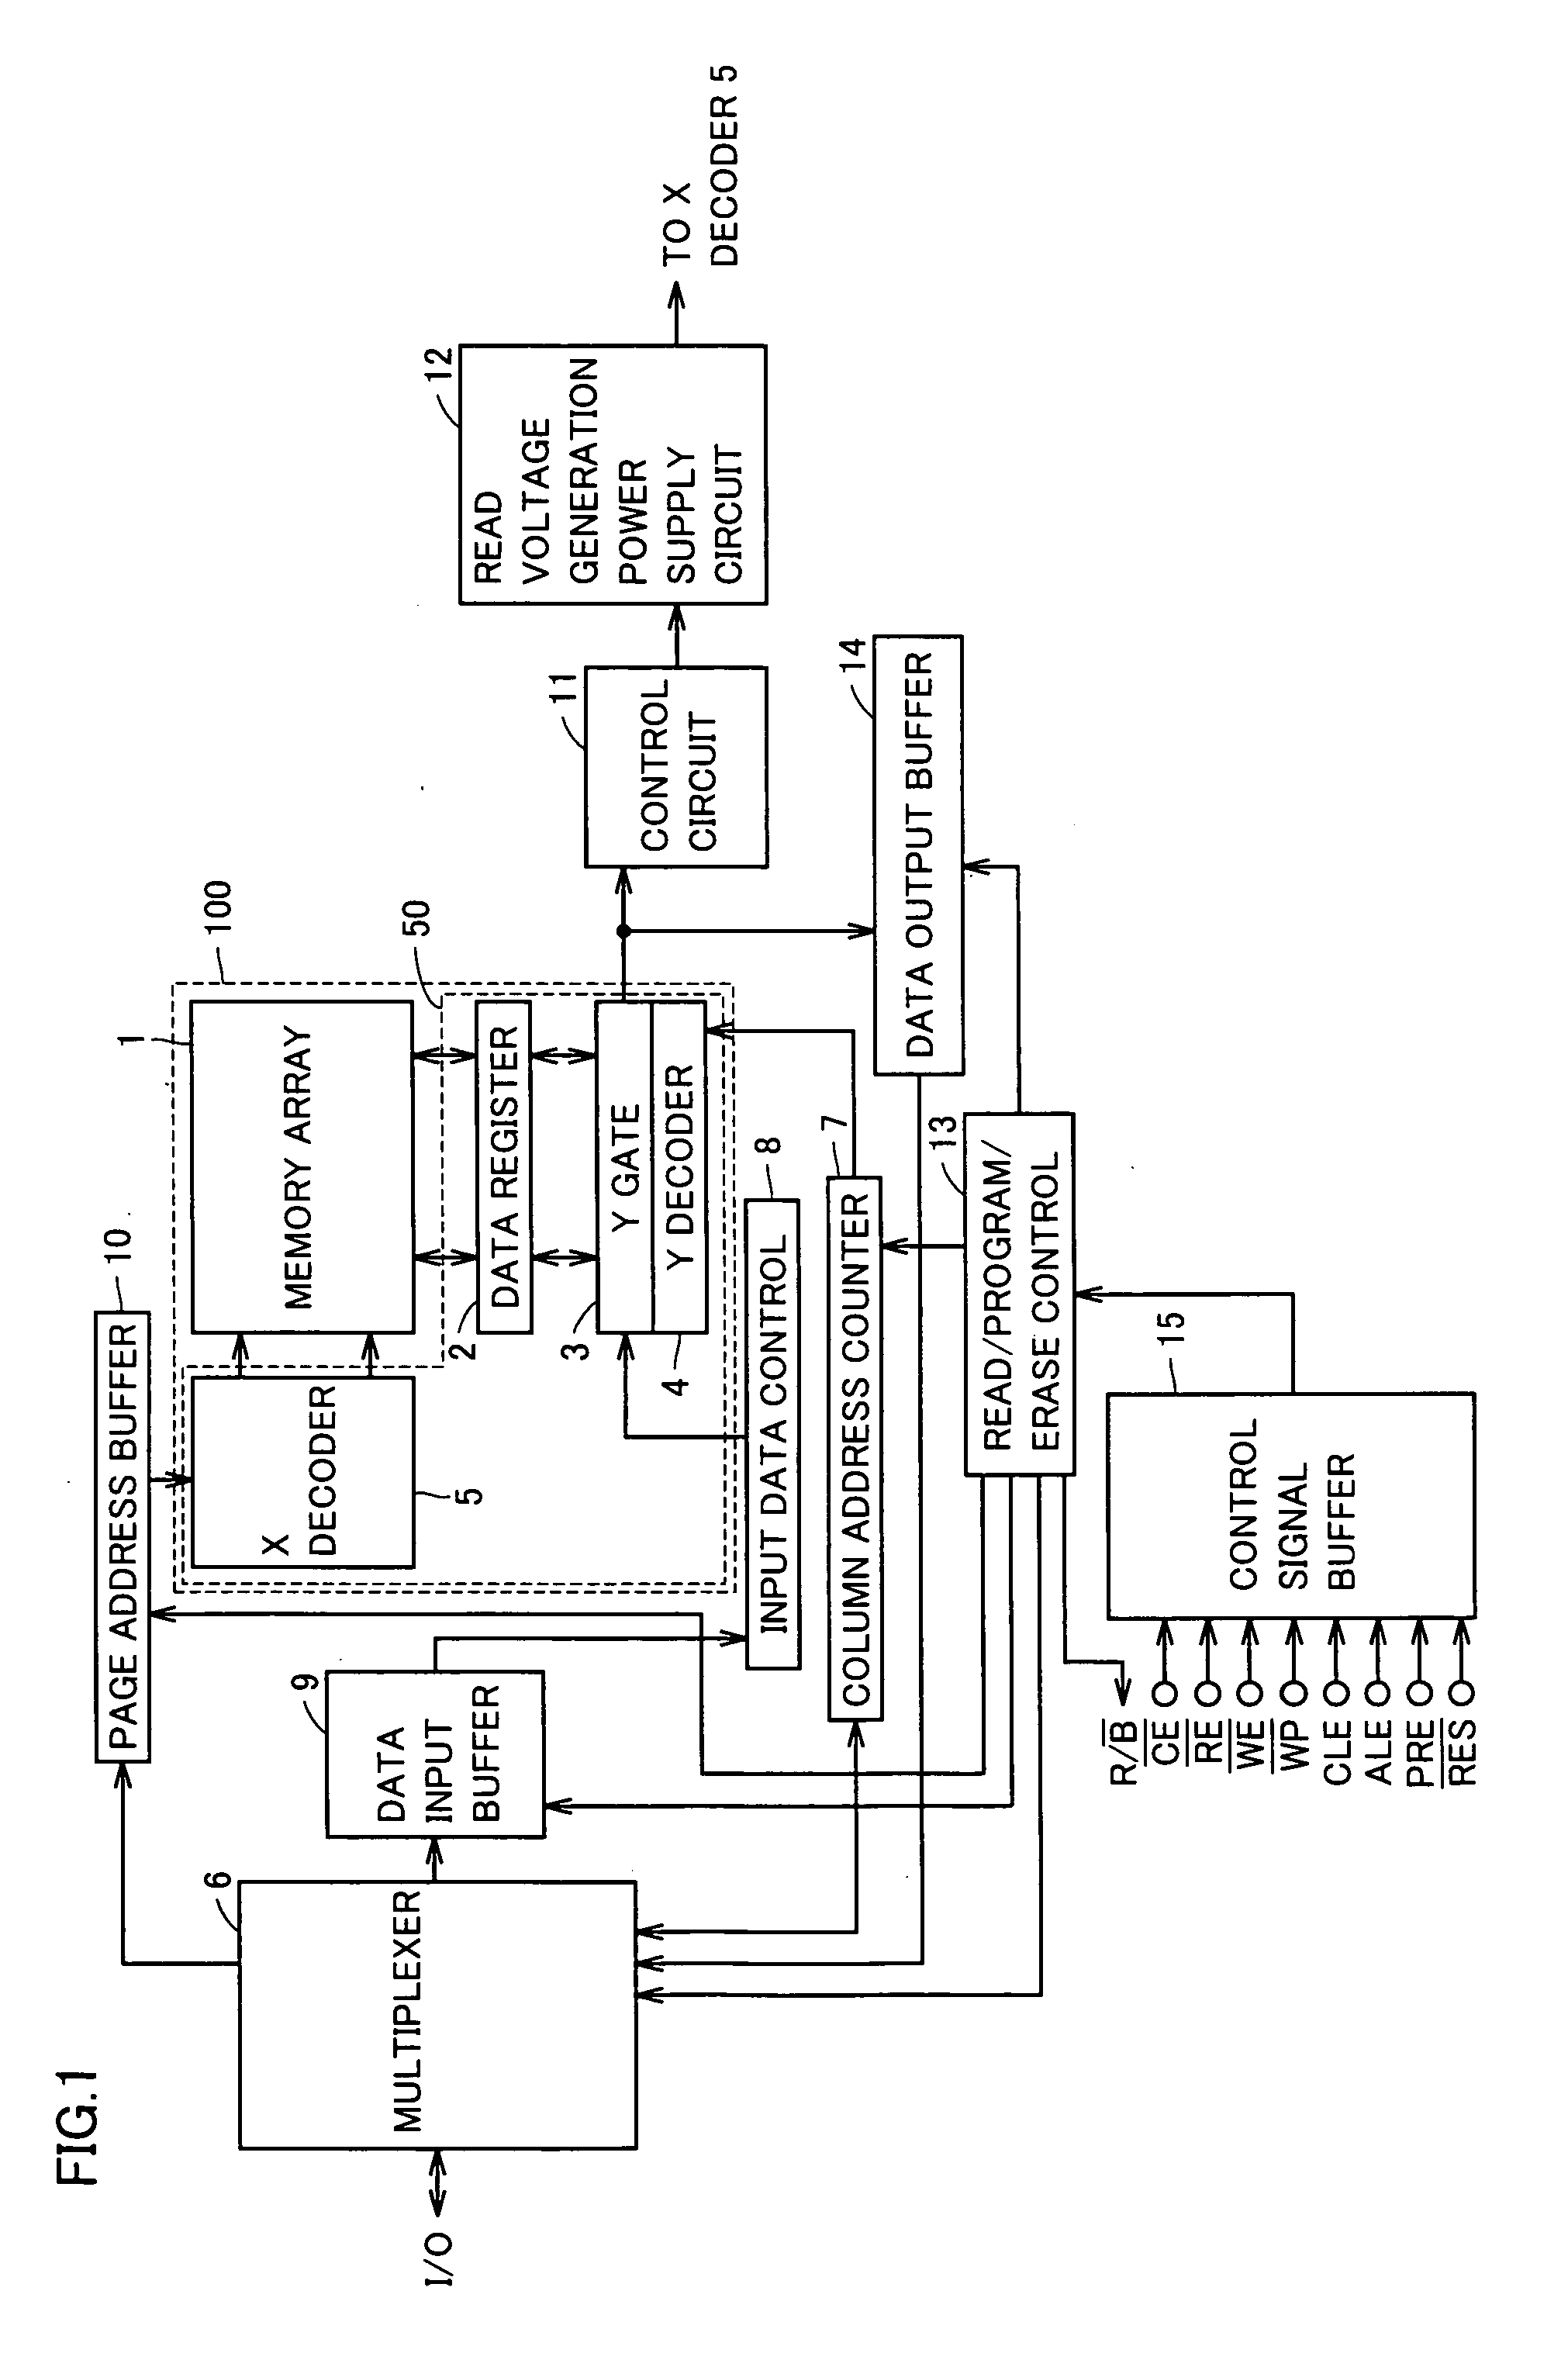 Semiconductor storage device having memory cell for storing data by using difference in threshold voltage